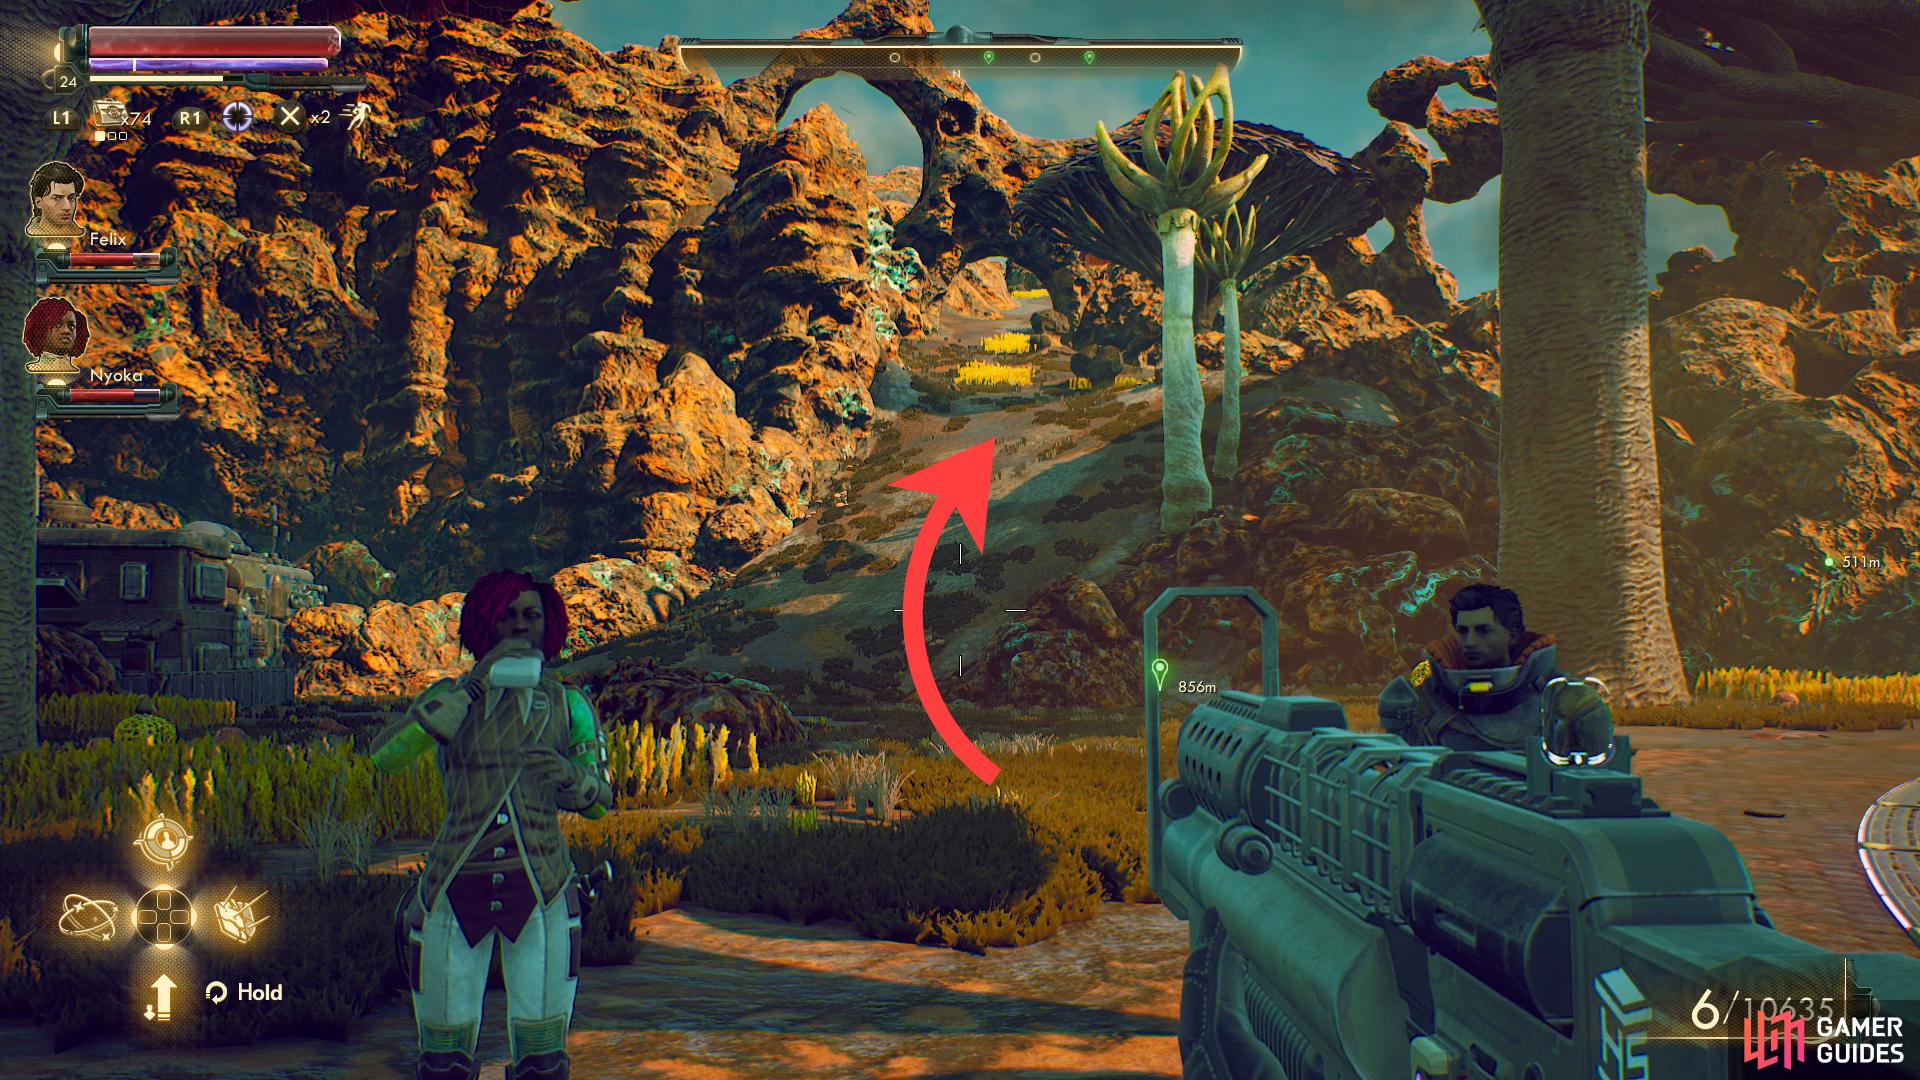 You can reach the Devil's Peak station via an alternate route by heading north from the Forlorn Crossroads.